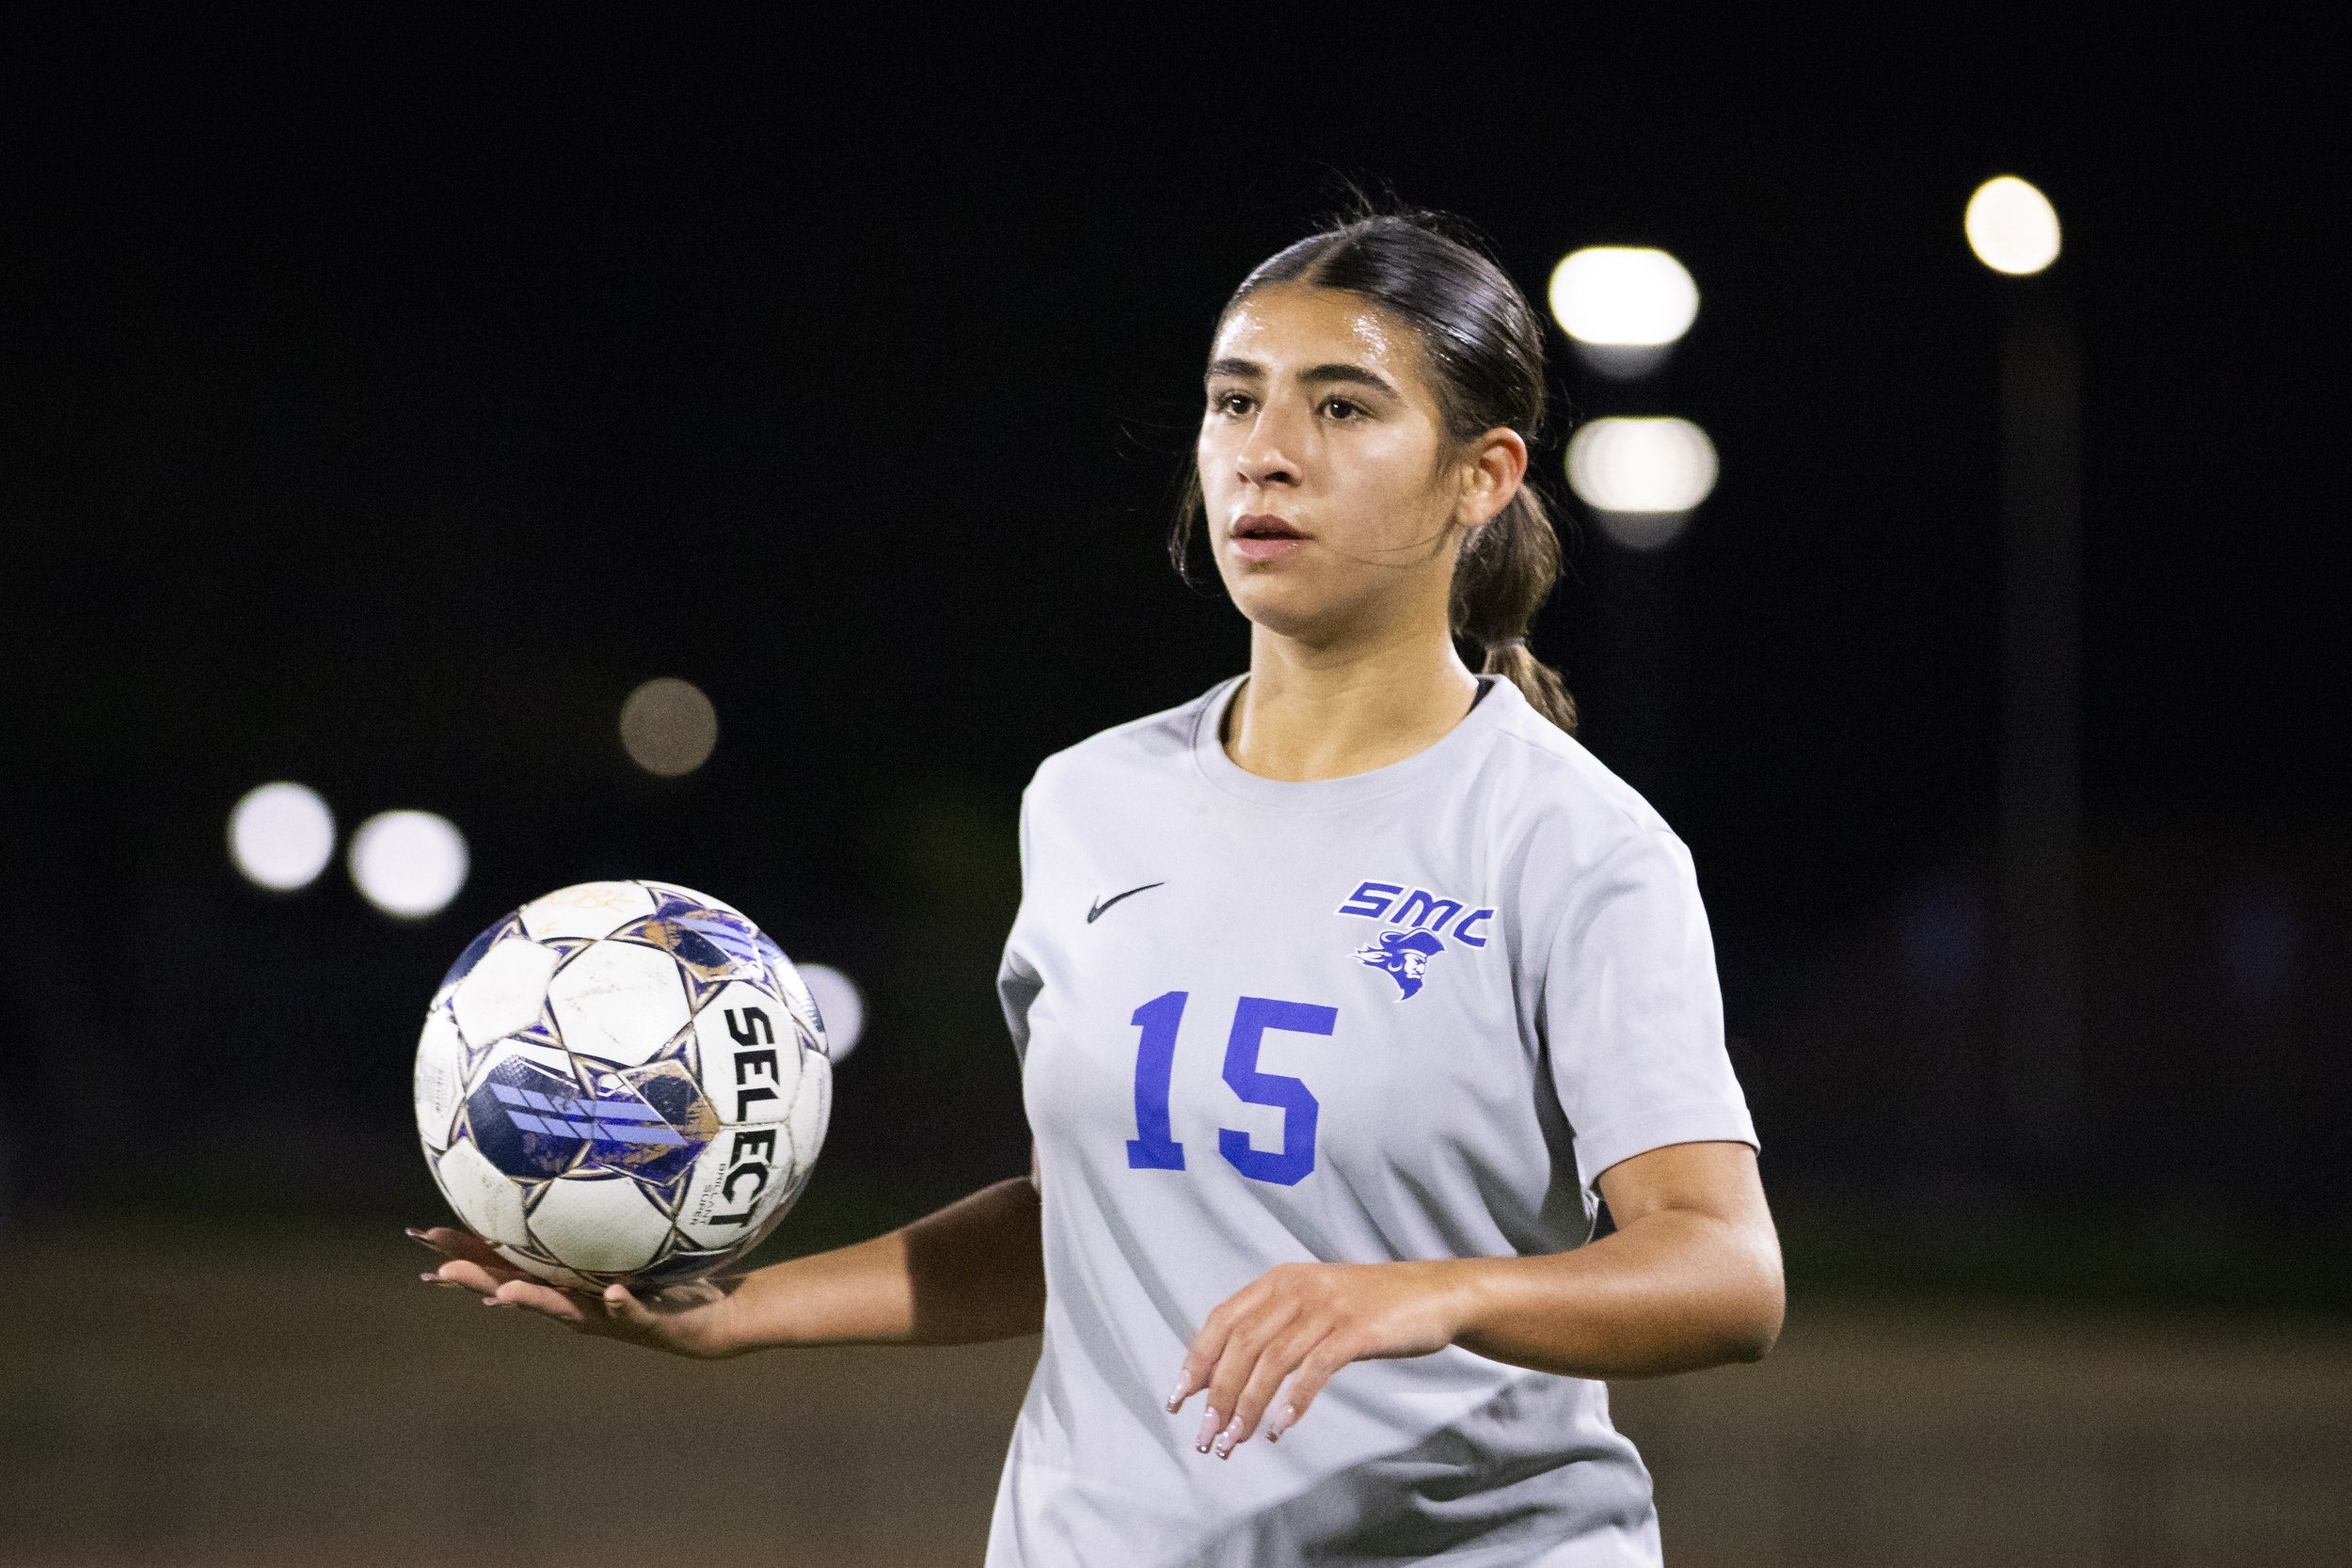  Santa Monica College Corsair forward Alinna Savaterre prepares to throw the ball back in bounds during a the first half of a soccer game against the Saddleback College Bobcats at Saddleback College in Mission Viejo, Calif., on Tuesday, Nov. 21, 2023